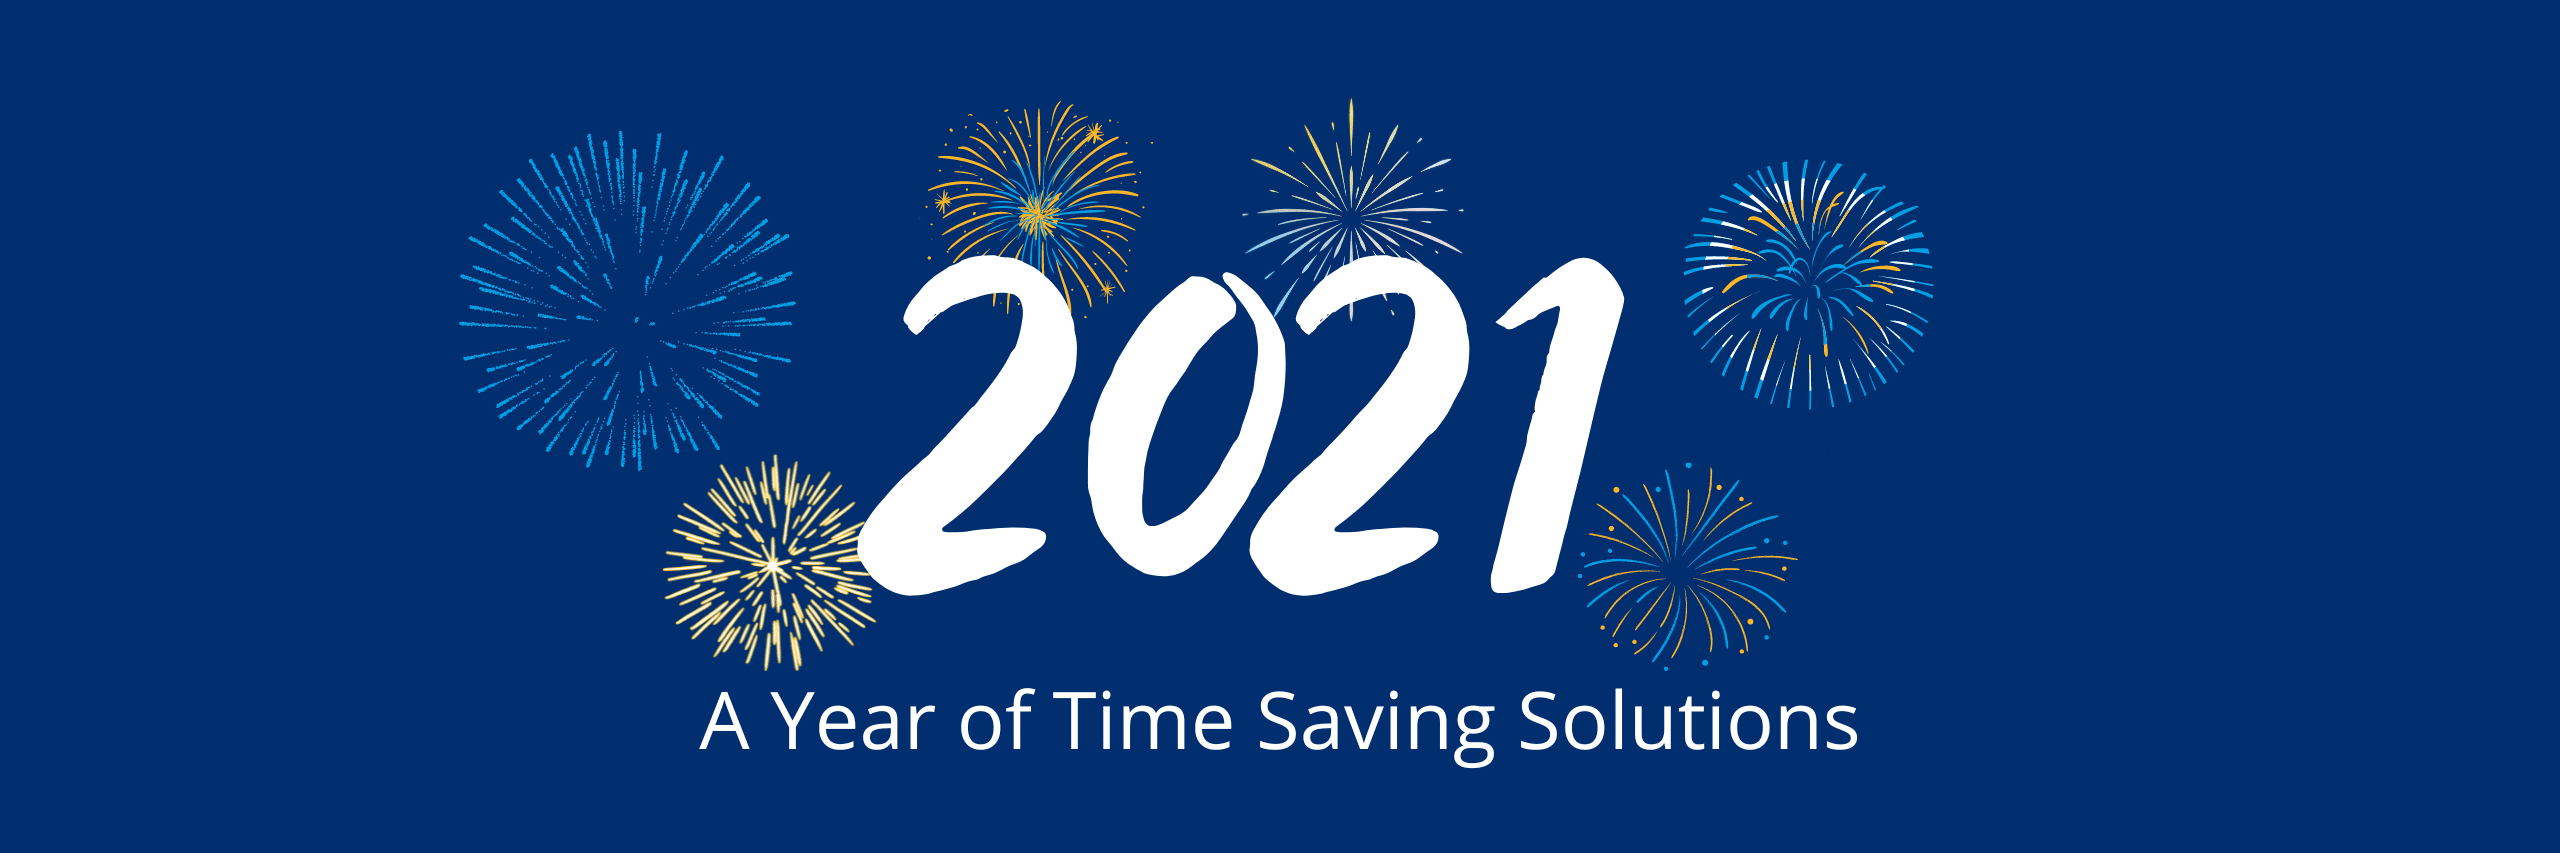 2021 - A Year of Time Saving Solutions